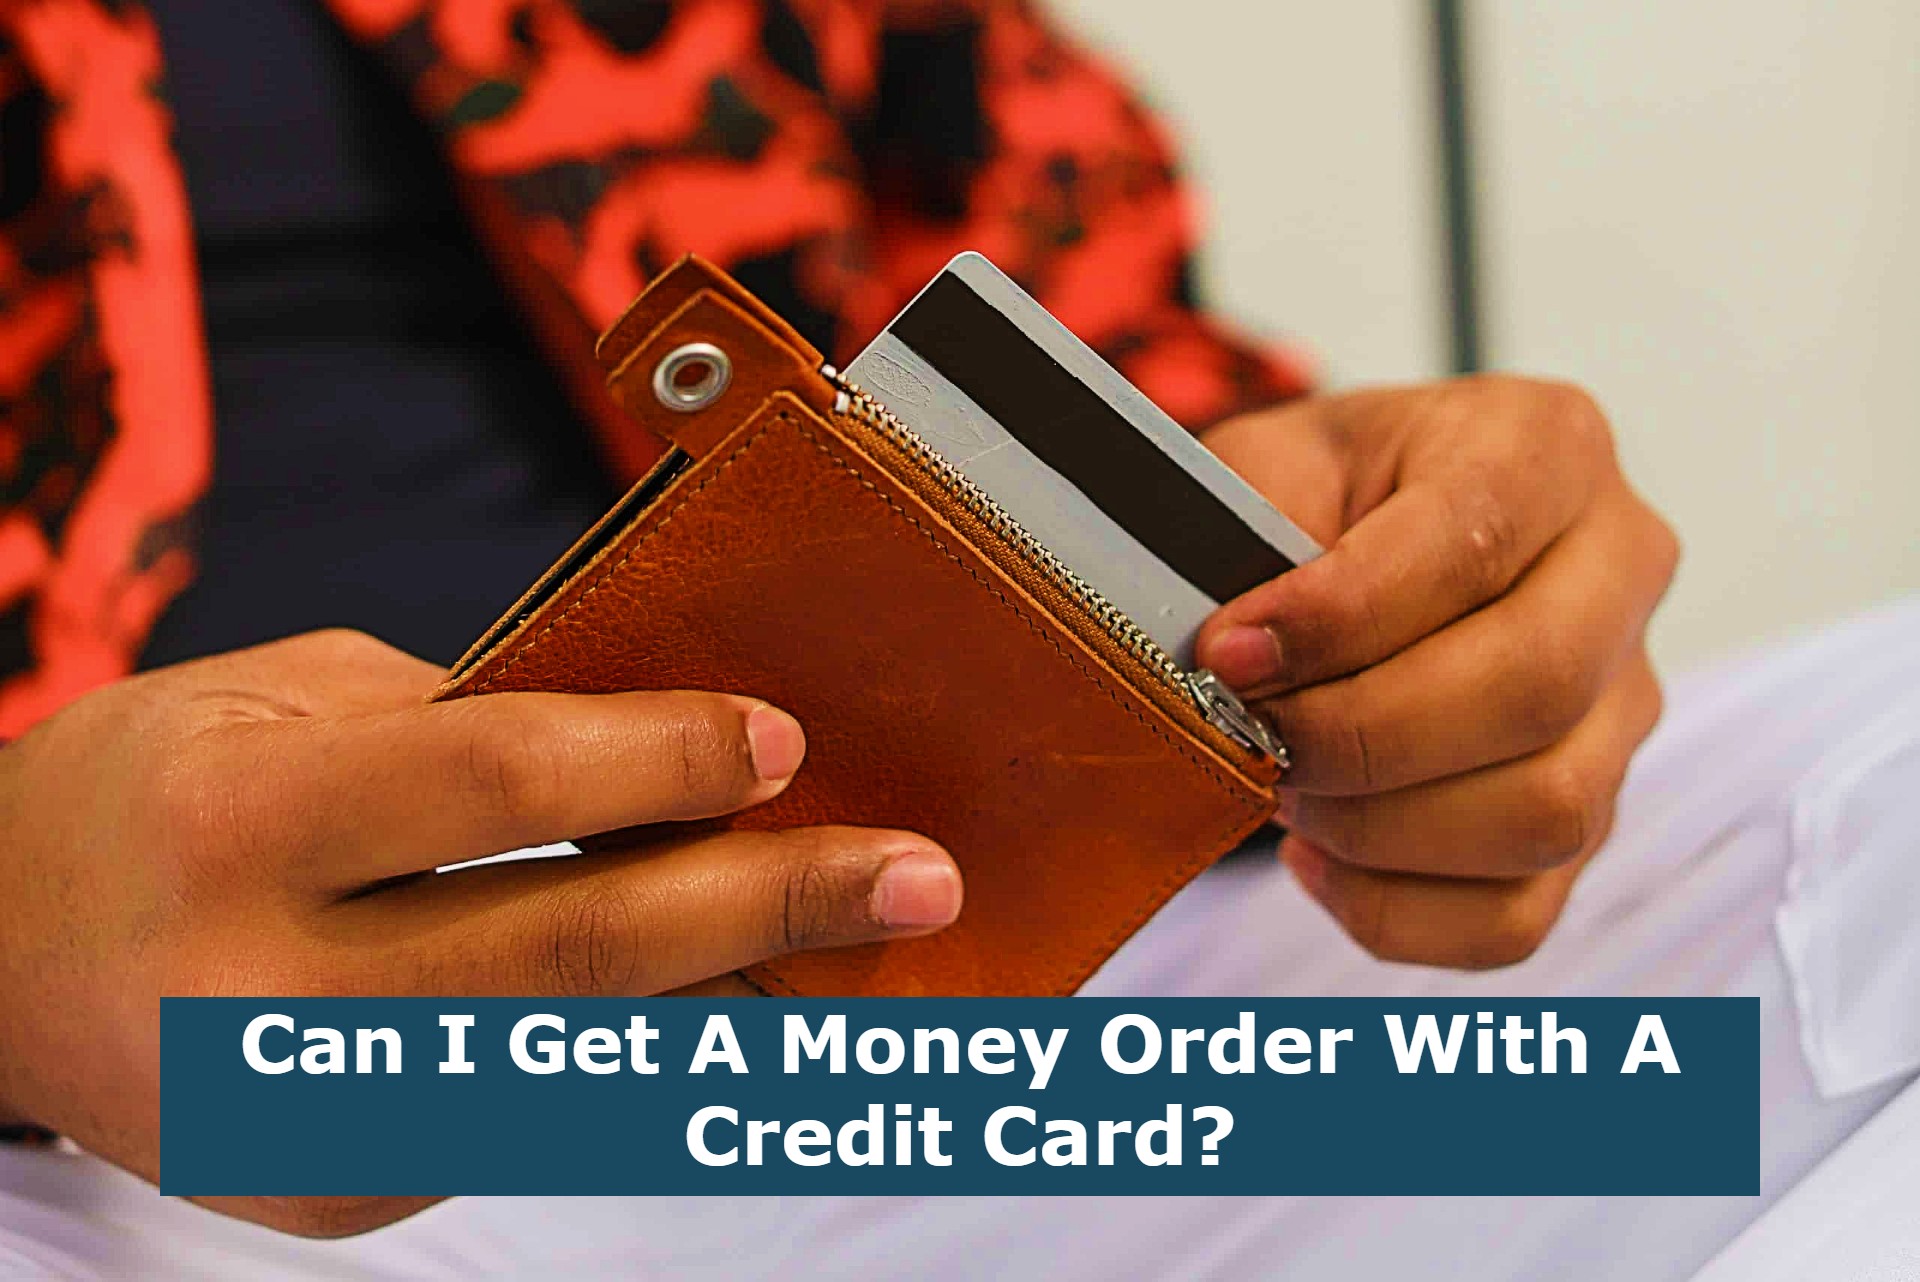 Can I Get A Money Order With A Credit Card?